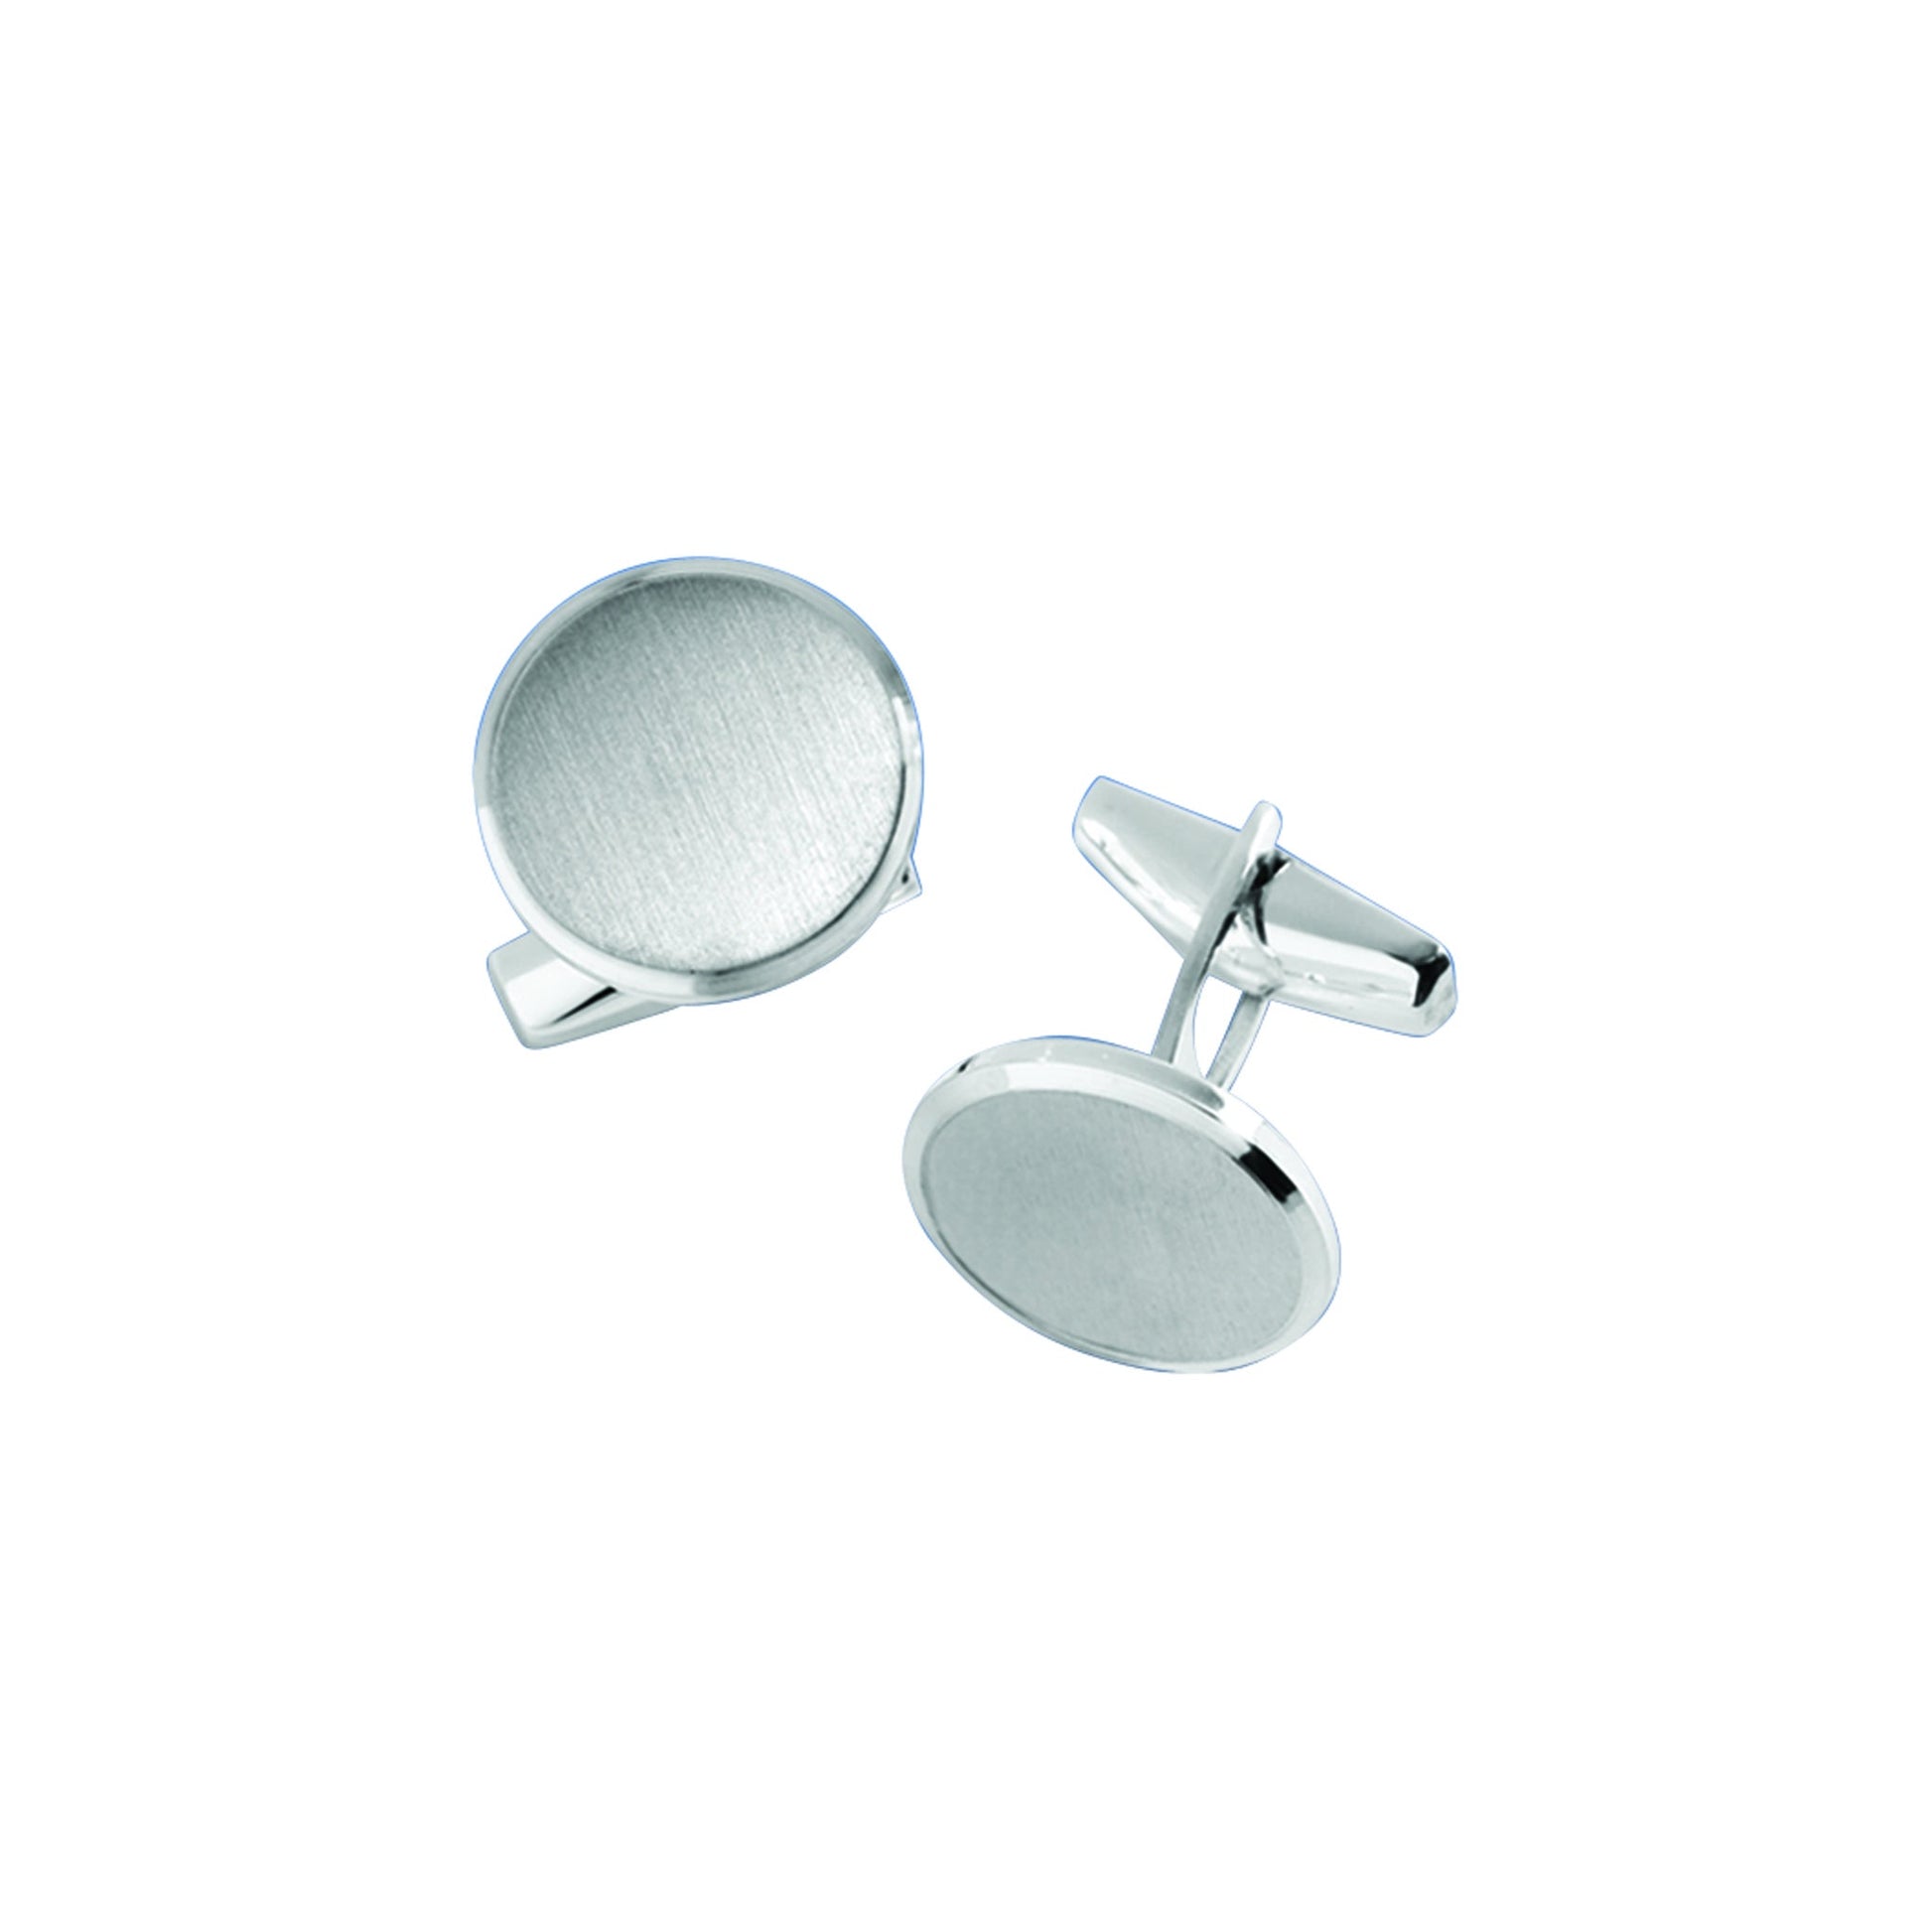 A sterling silver round brushed cufflinks with engine-turned border displayed on a neutral white background.